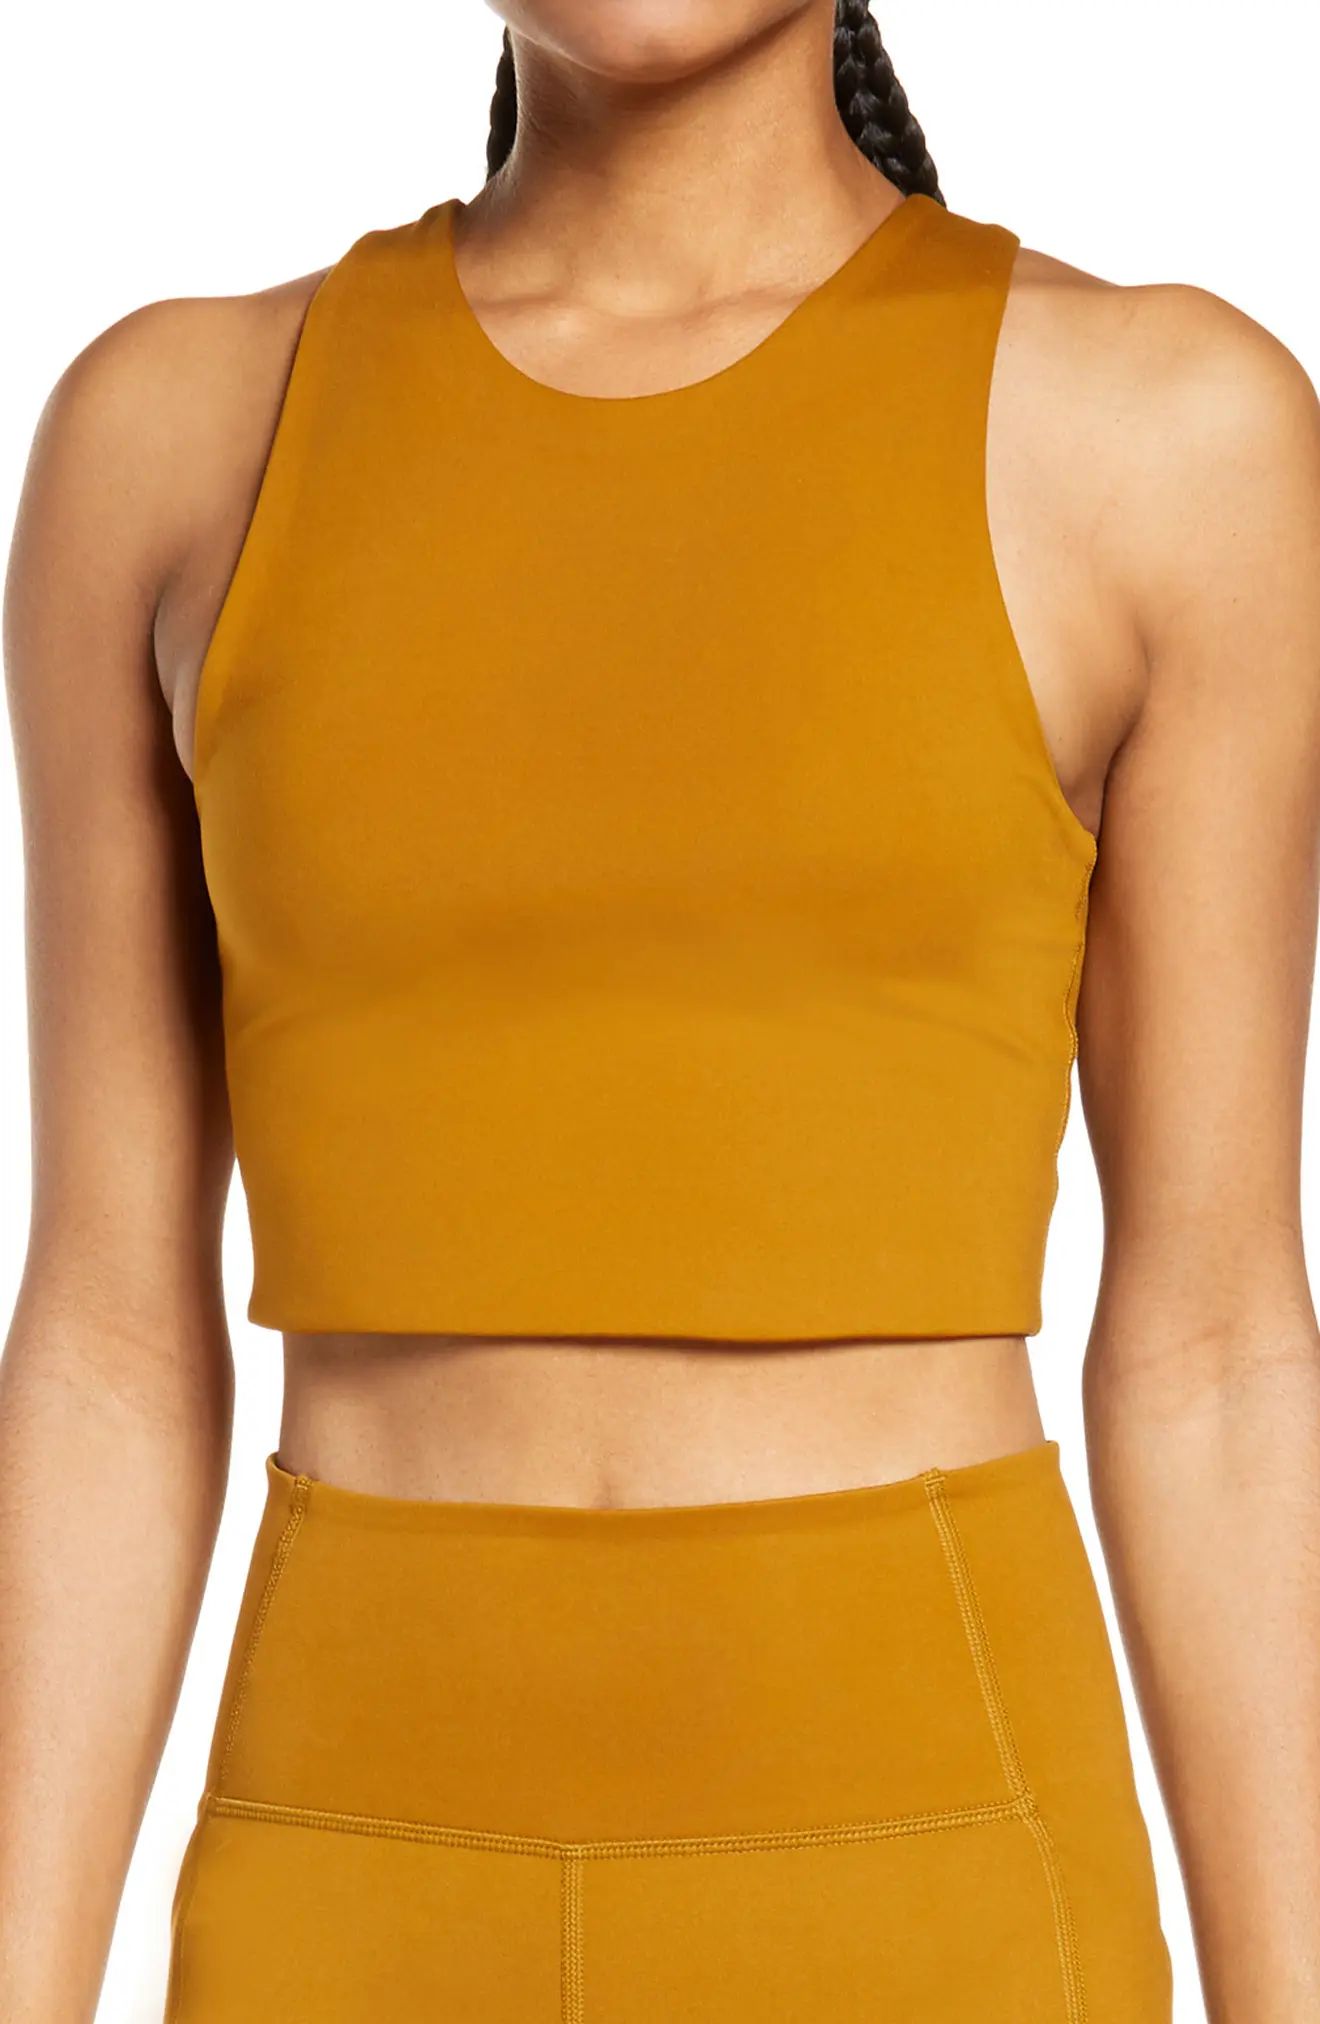 Girlfriend Collective Dylan Longline Racerback Sports Bra, Size X-Small in Saddle at Nordstrom | Nordstrom